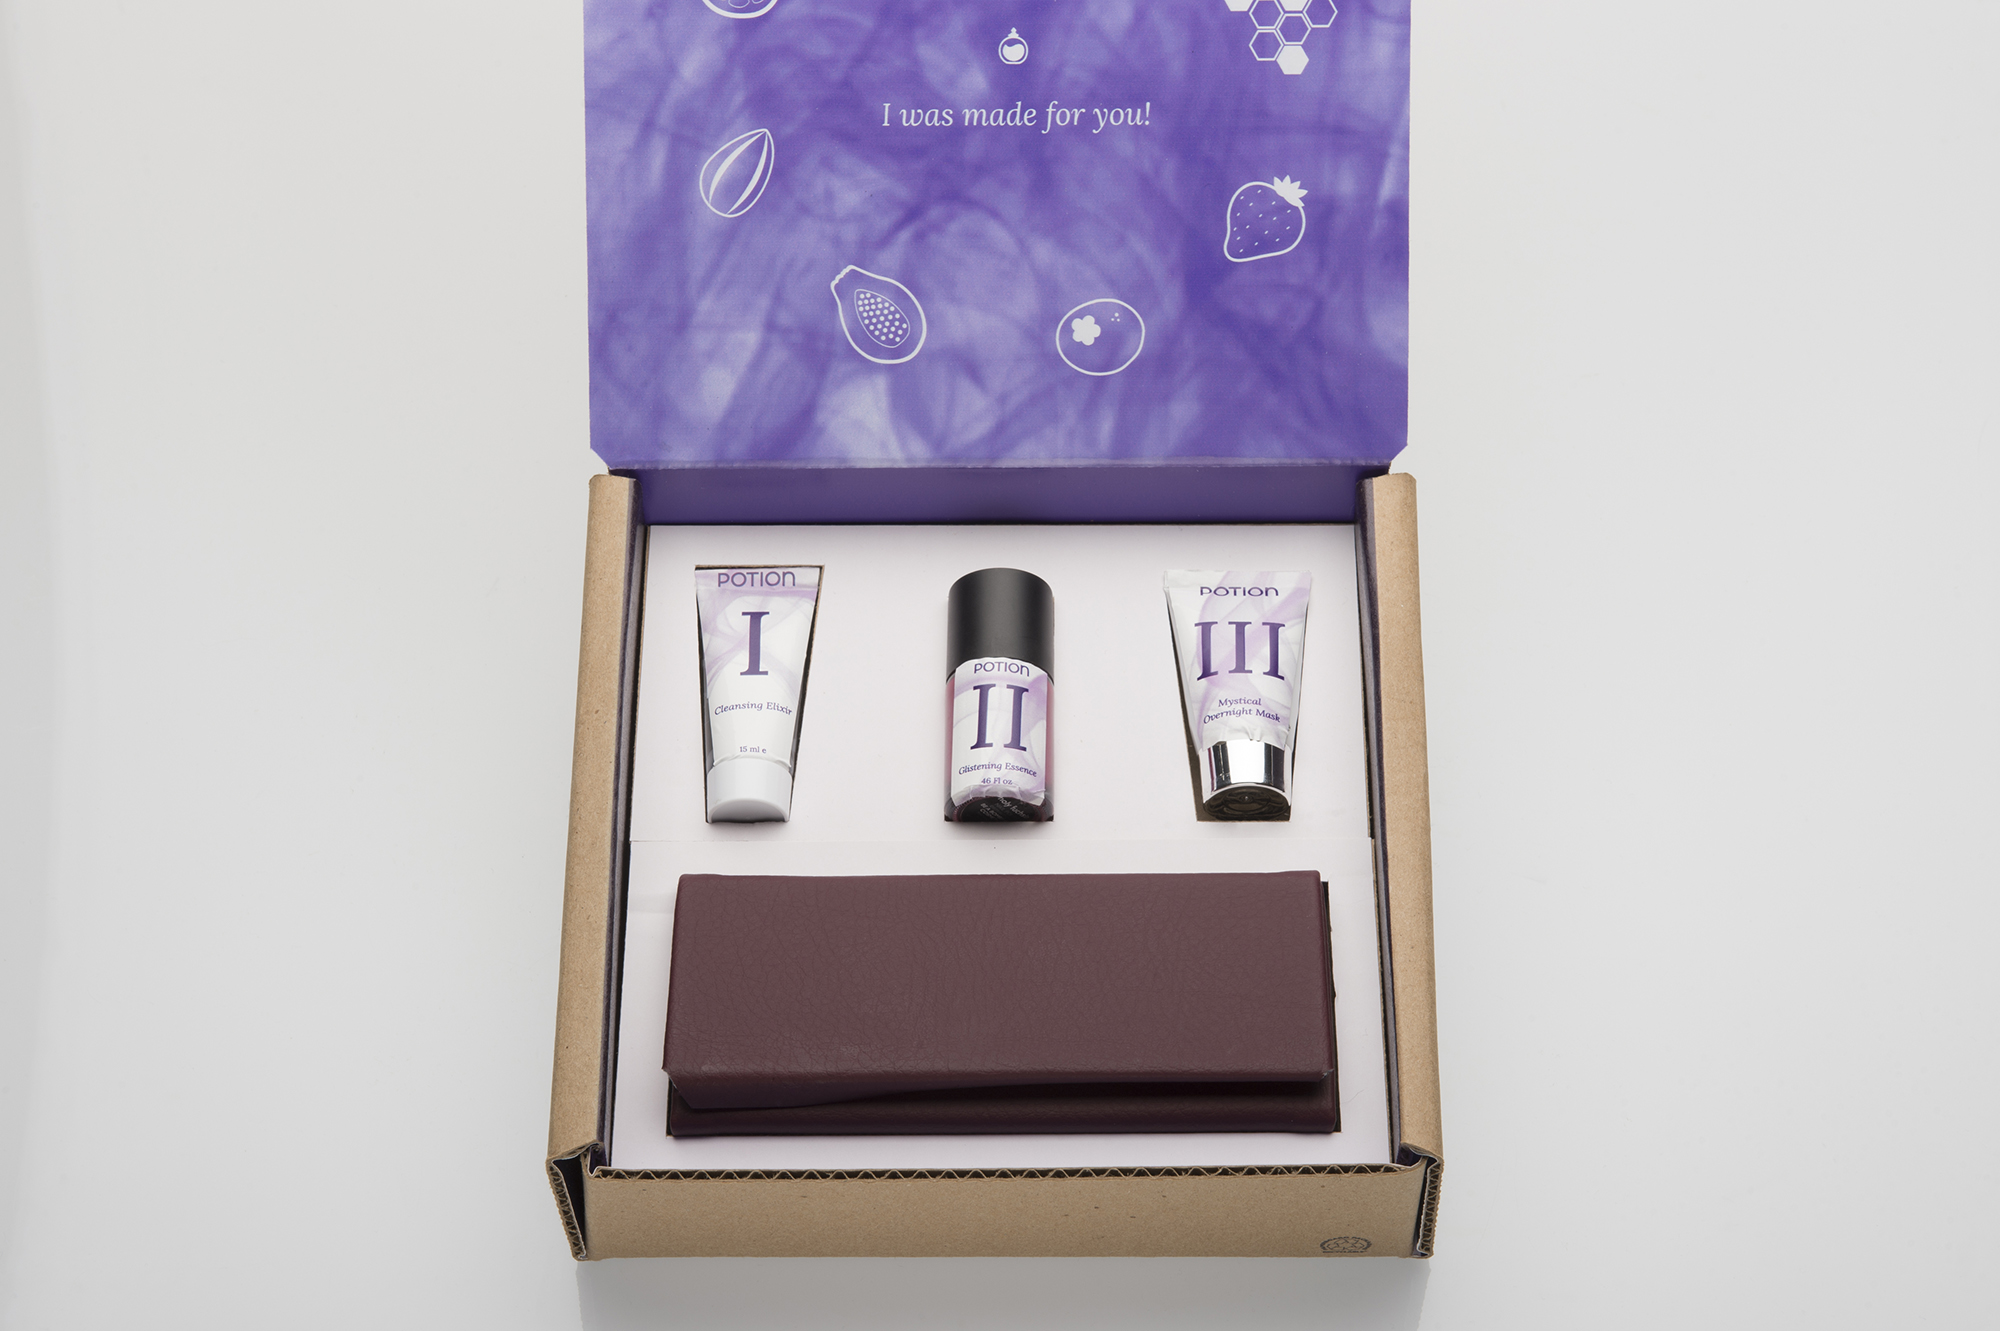 A purple and white box sits open with beauty products in it